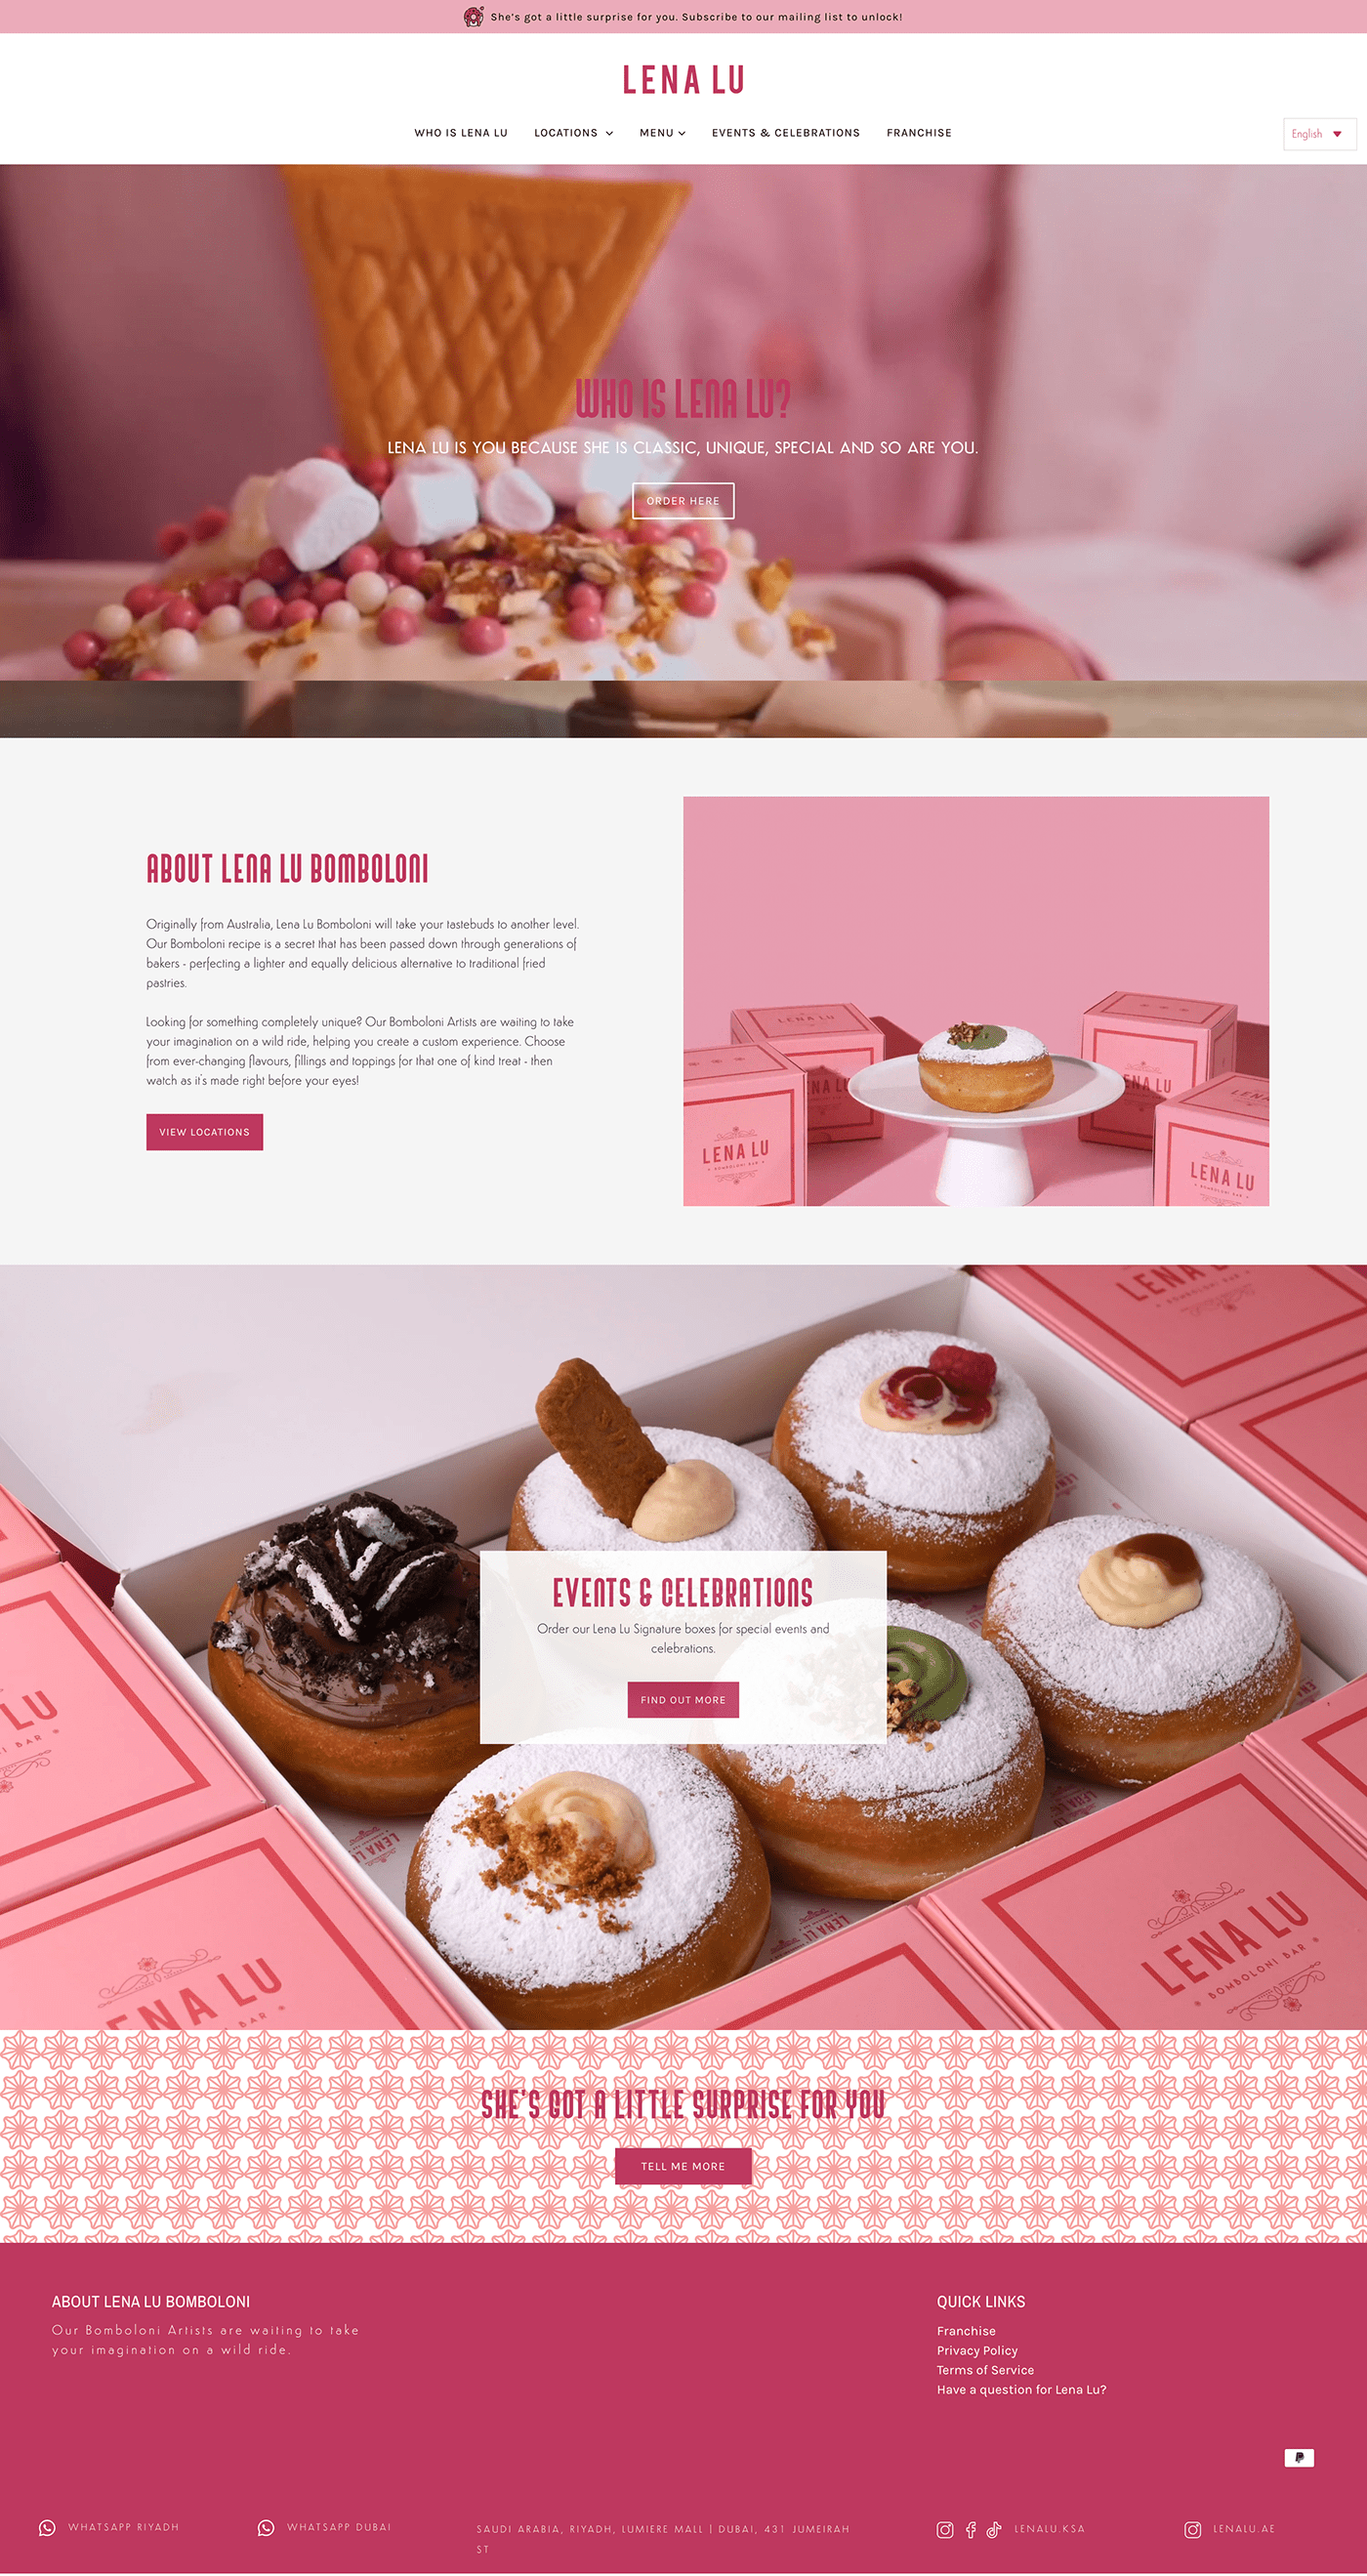 shopify store ecommerce website shopify store design Theme Customization dropshipping store Shopify Design bomboloni Bomboloni Shop Bomboloni store